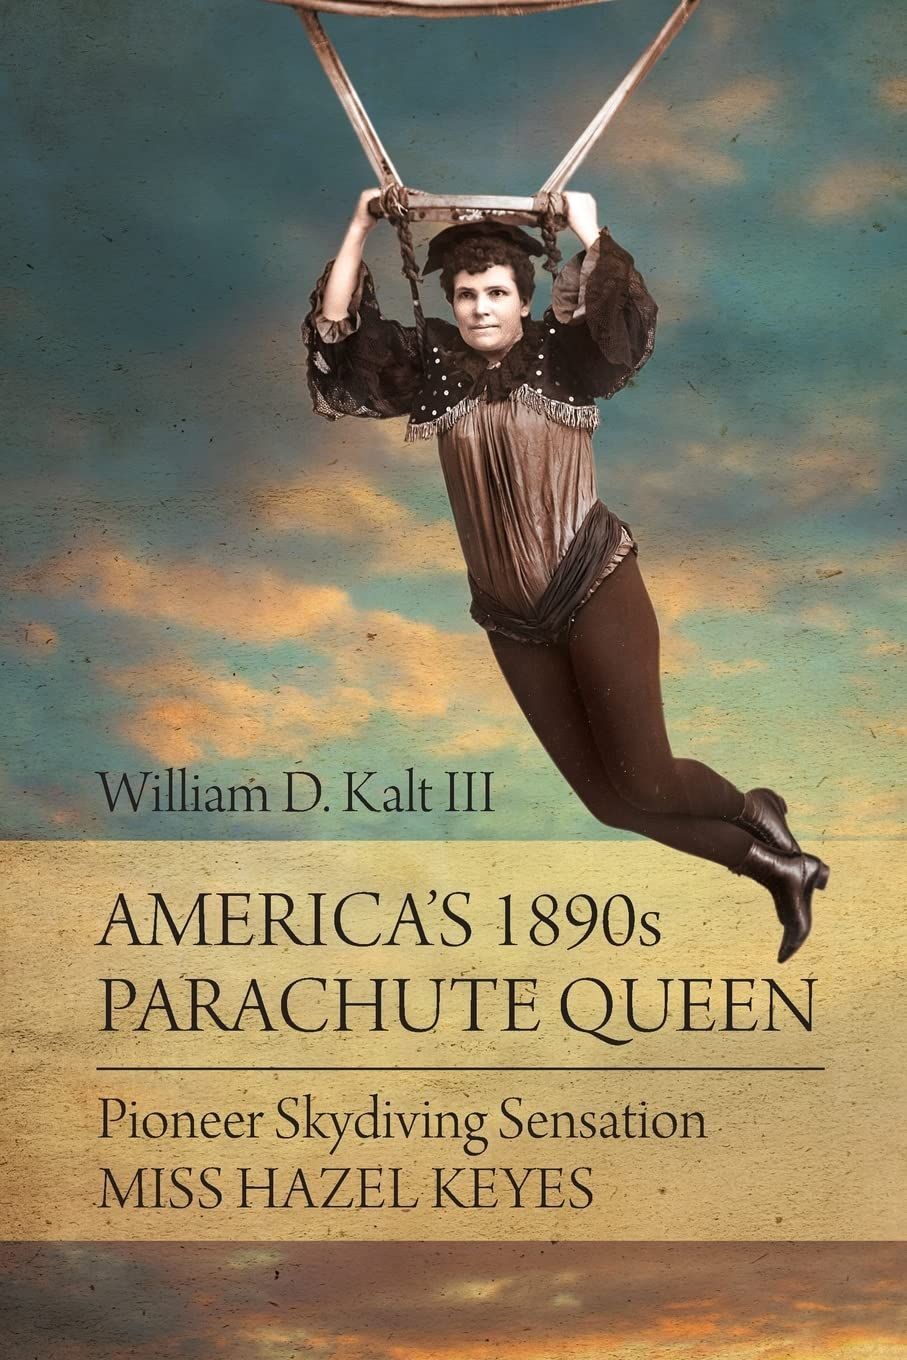 Adventures in the Sky and Misadventures on the Ground: On William D. Kalt III’s “America’s 1890s Parachute Queen” and Jana Bommersbach and Bob Boze Bell’s “Hellraisers and Trailblazers”